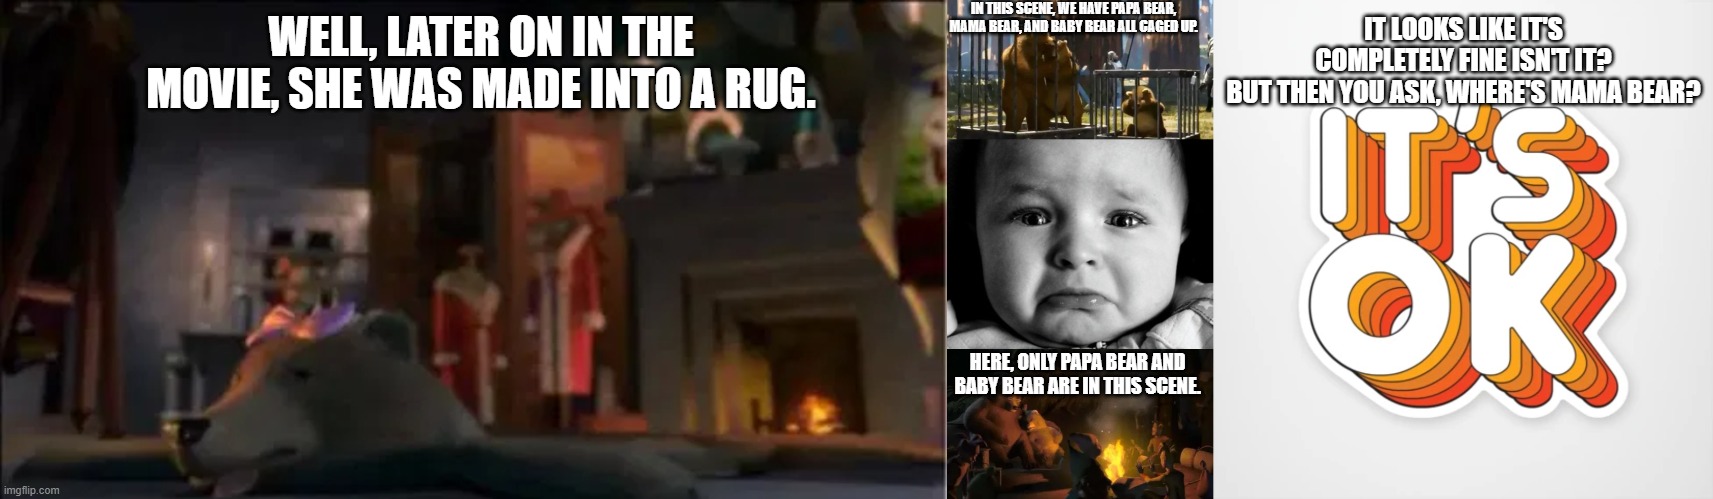 Ruined Childhood #1: Shrek (2001) - The 3 Bears Theory | IN THIS SCENE, WE HAVE PAPA BEAR, MAMA BEAR, AND BABY BEAR ALL CAGED UP. IT LOOKS LIKE IT'S COMPLETELY FINE ISN'T IT?
BUT THEN YOU ASK, WHERE'S MAMA BEAR? WELL, LATER ON IN THE MOVIE, SHE WAS MADE INTO A RUG. HERE, ONLY PAPA BEAR AND BABY BEAR ARE IN THIS SCENE. | image tagged in memes,sad baby | made w/ Imgflip meme maker